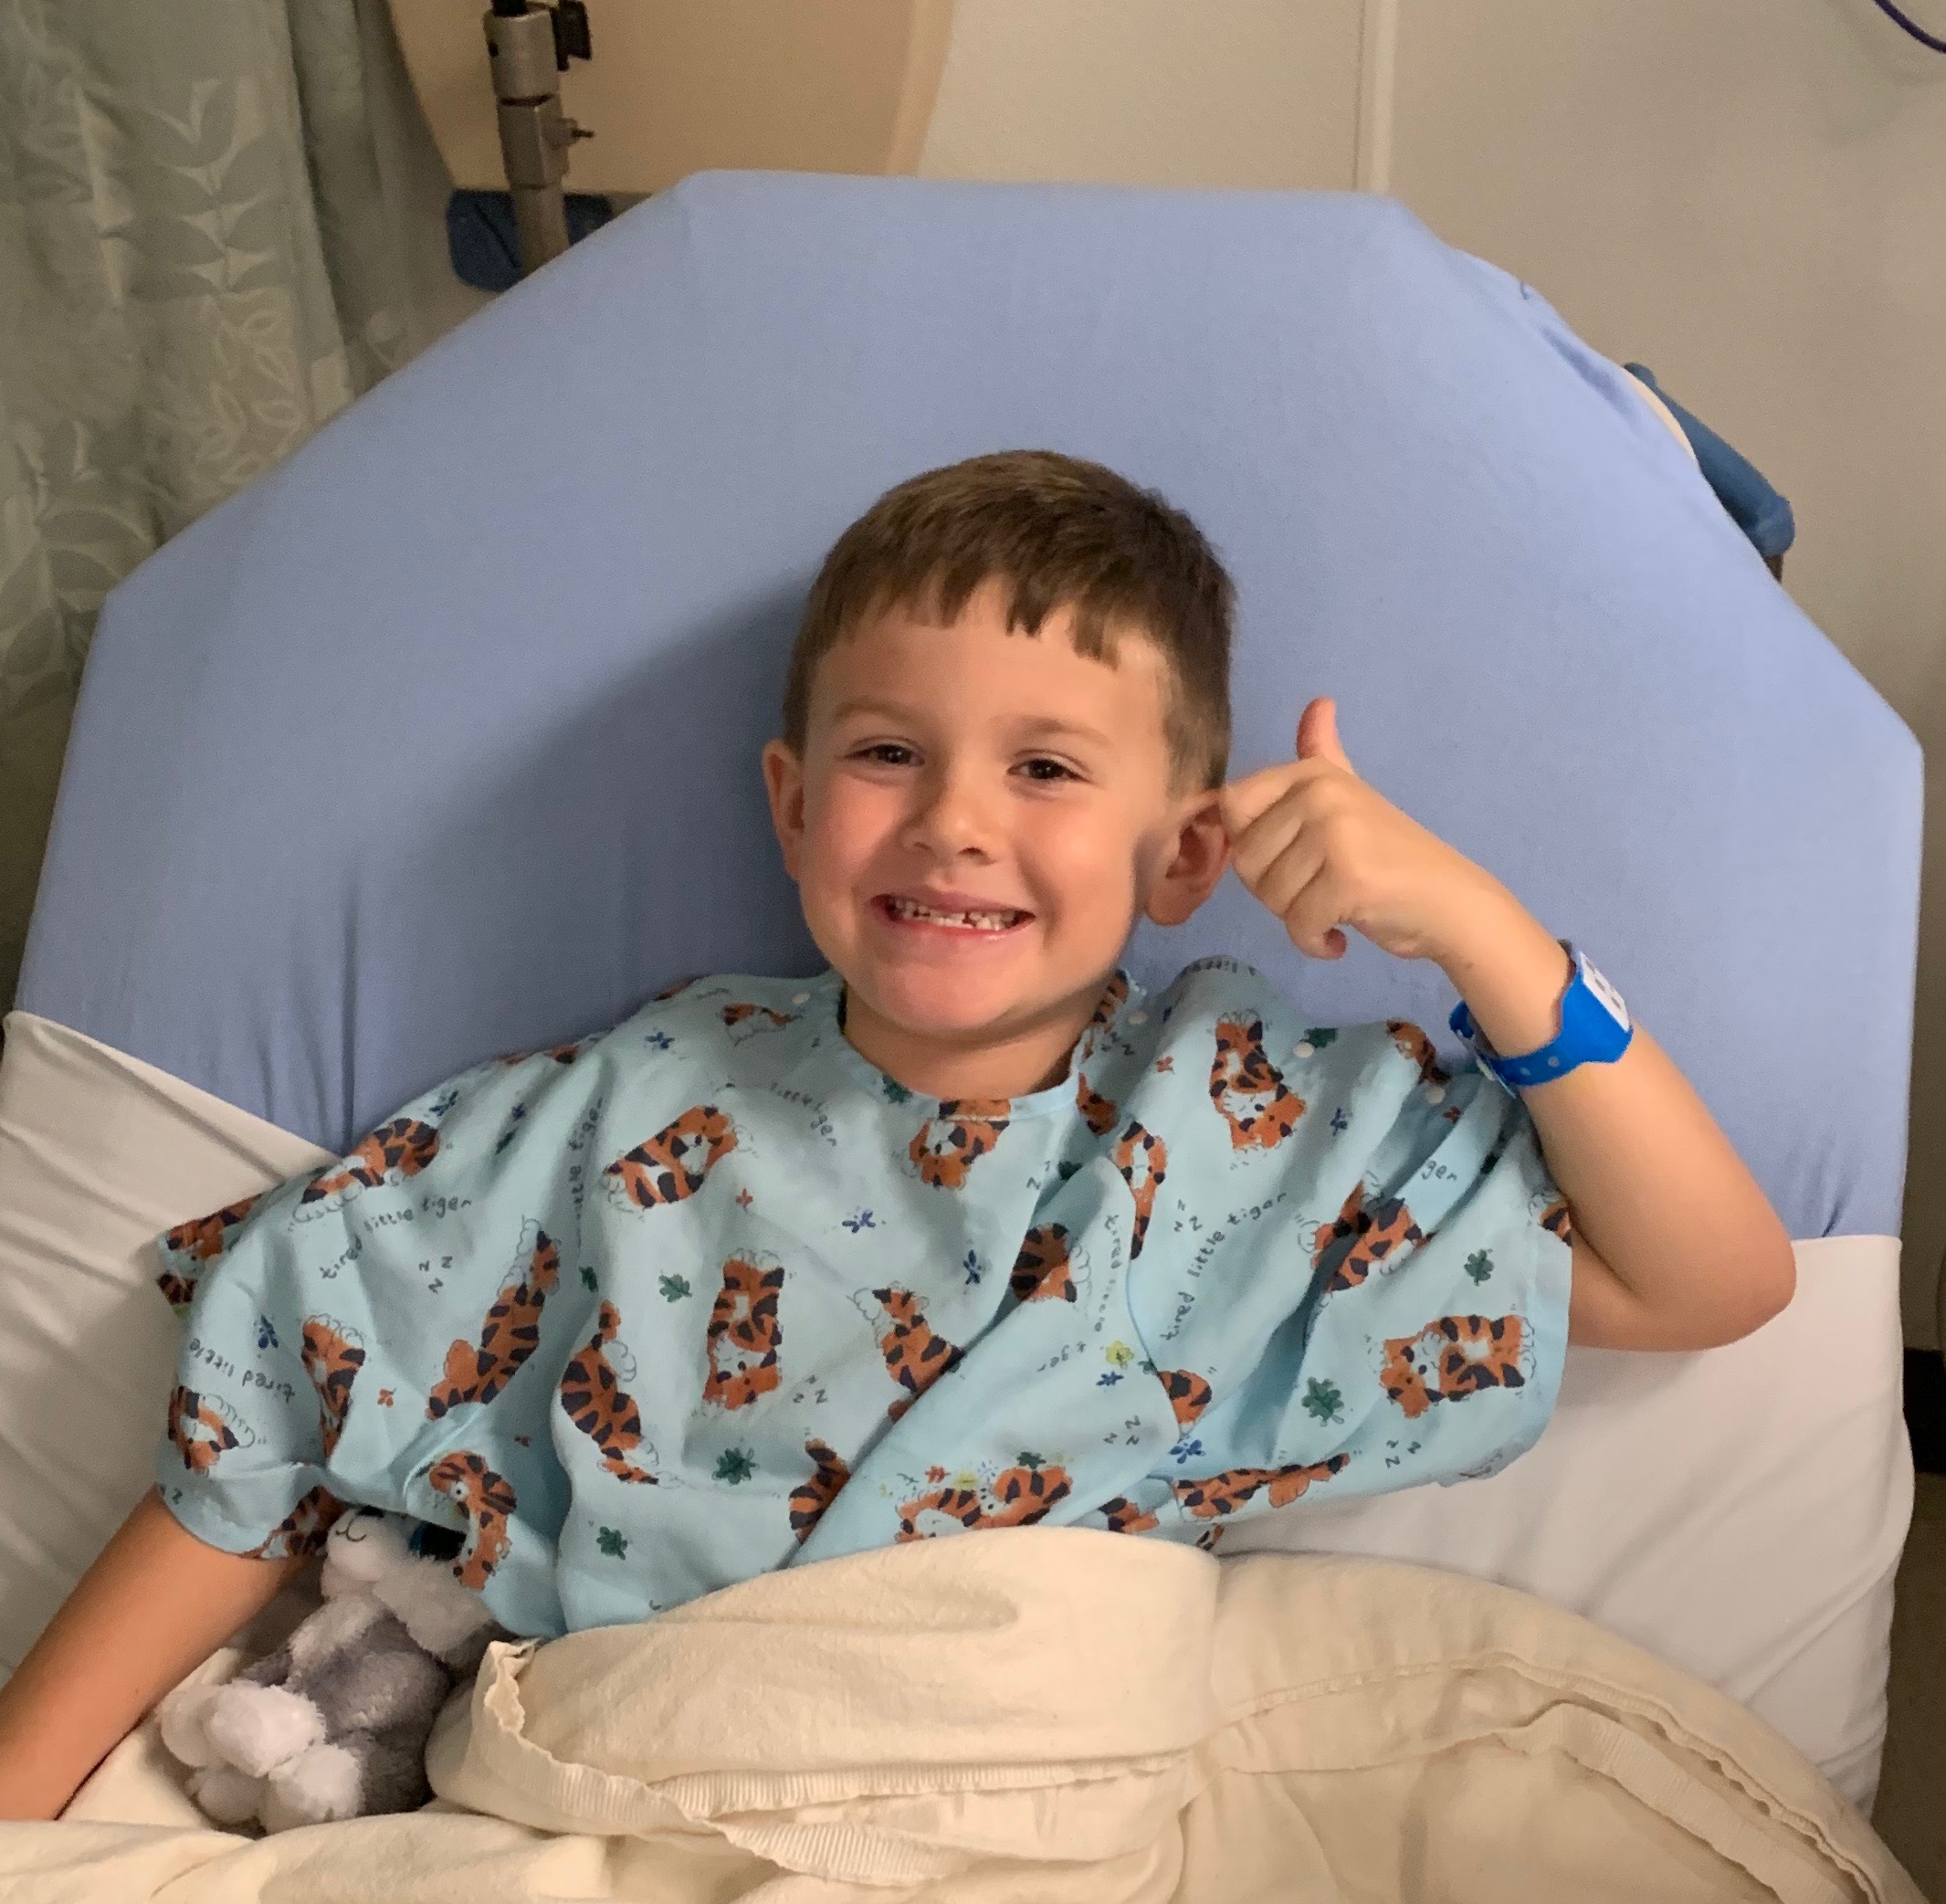 baylor in a hospital gown tucked into a hospital bed while smiling and holding a thumbs up